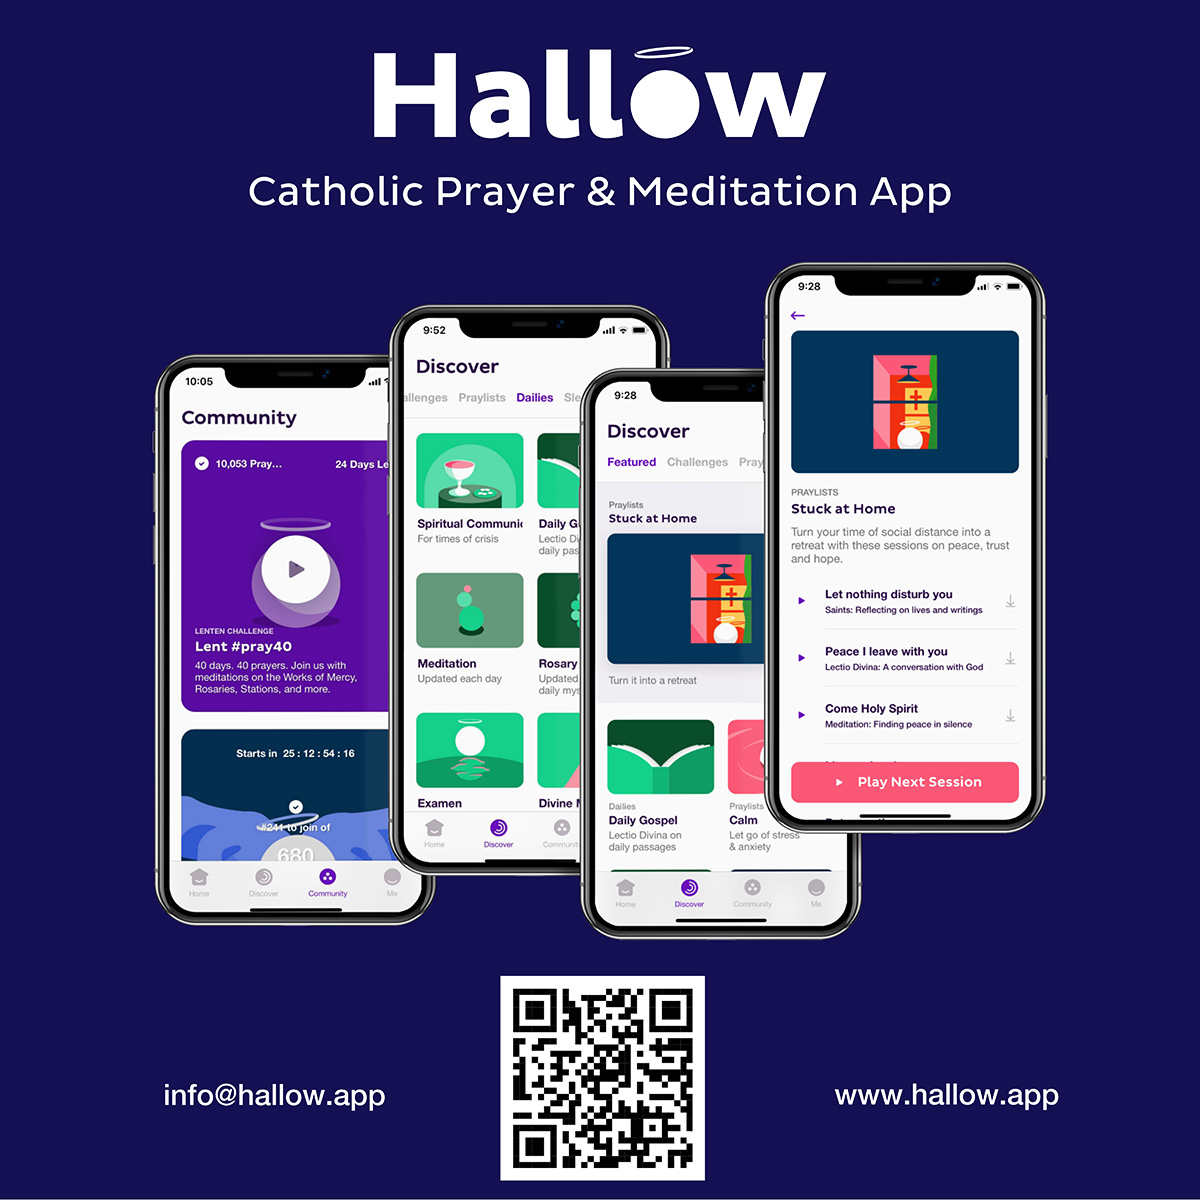 Update: Successful Catholic app adds features to help people cope in